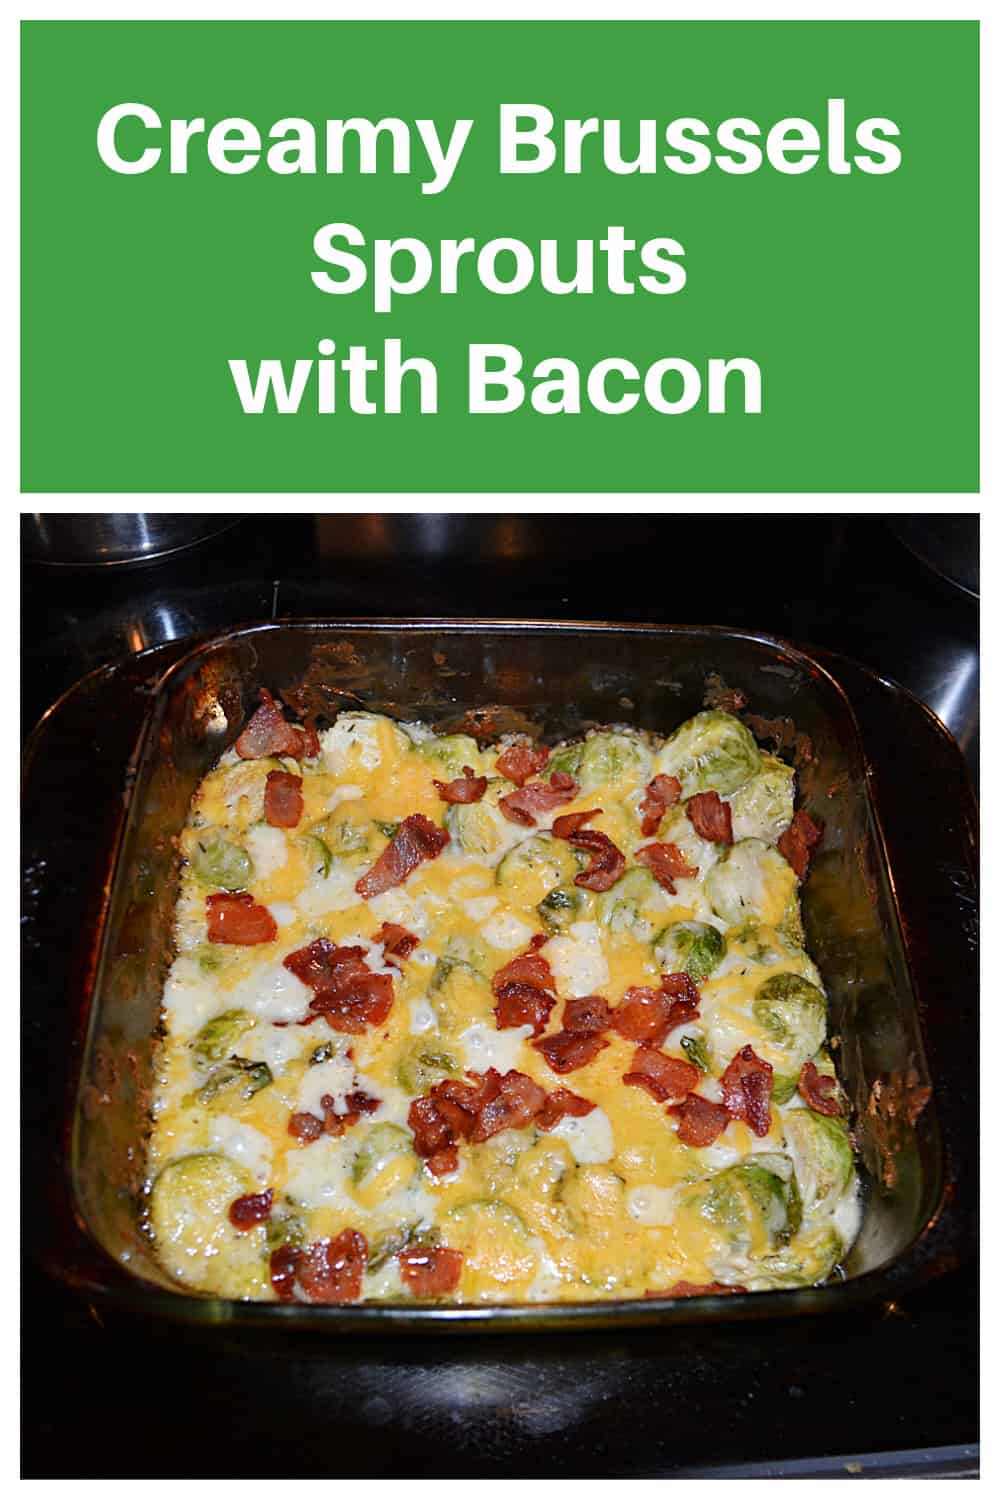 Creamy Brussels Sprouts with Bacon